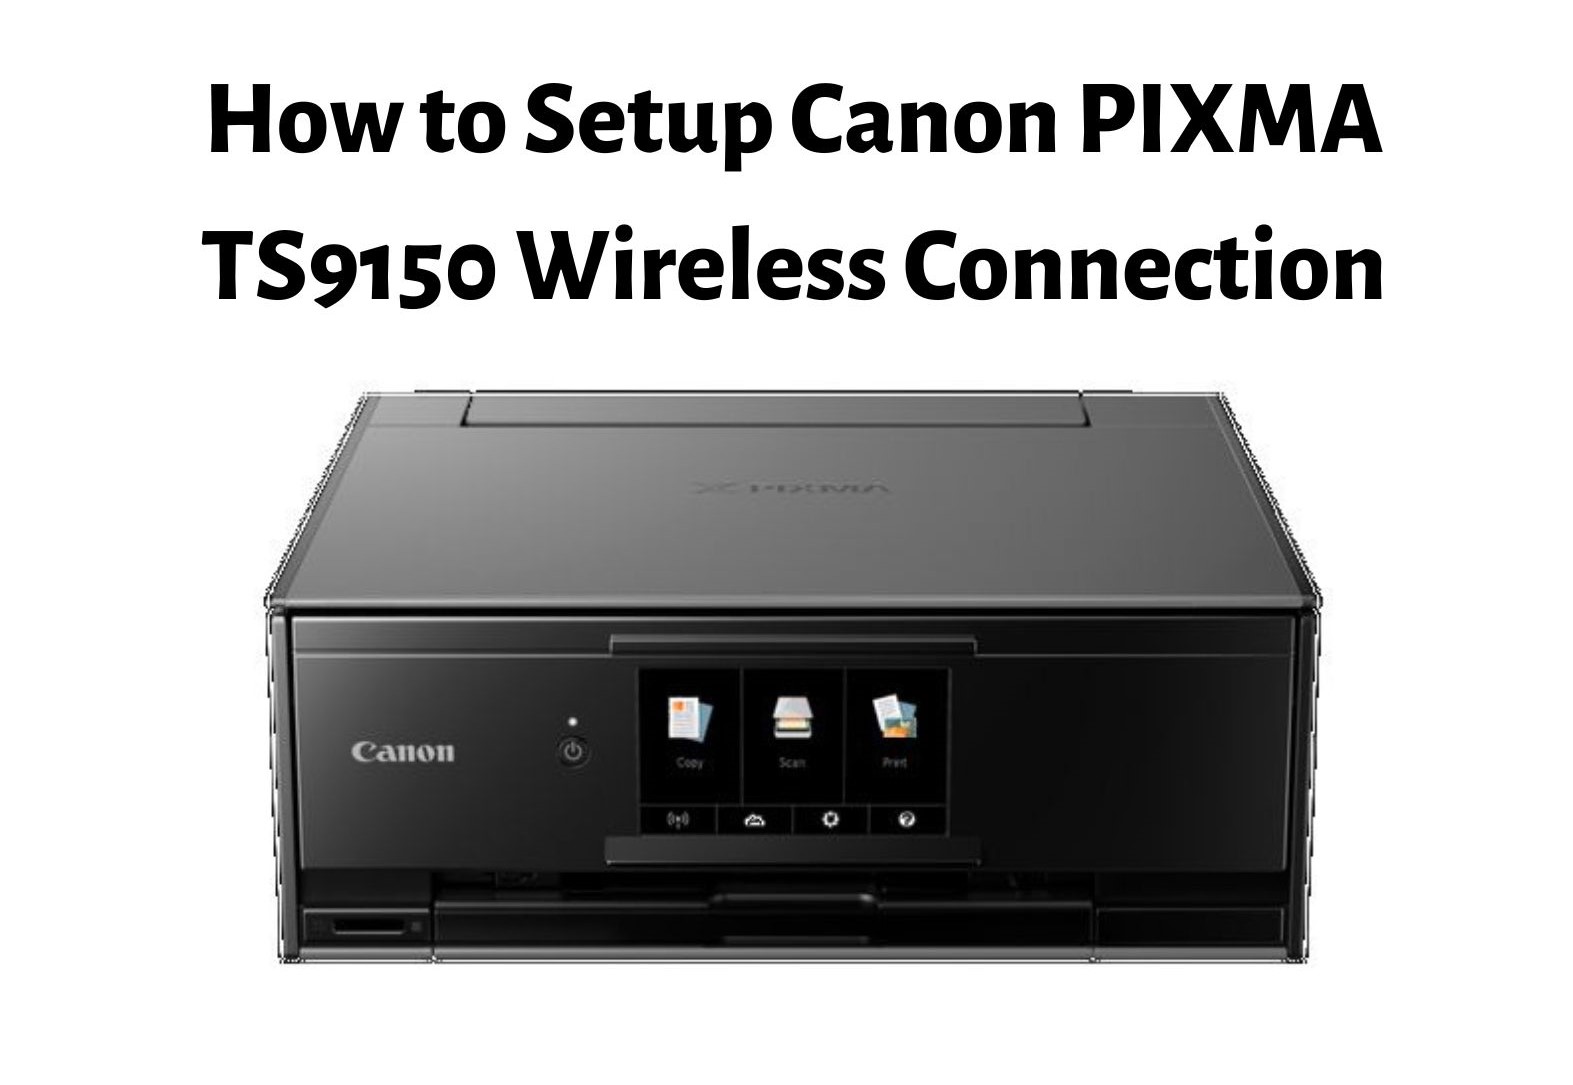 Harden Injection Headless How to Setup Canon PIXMA TS9150 Wireless Connection